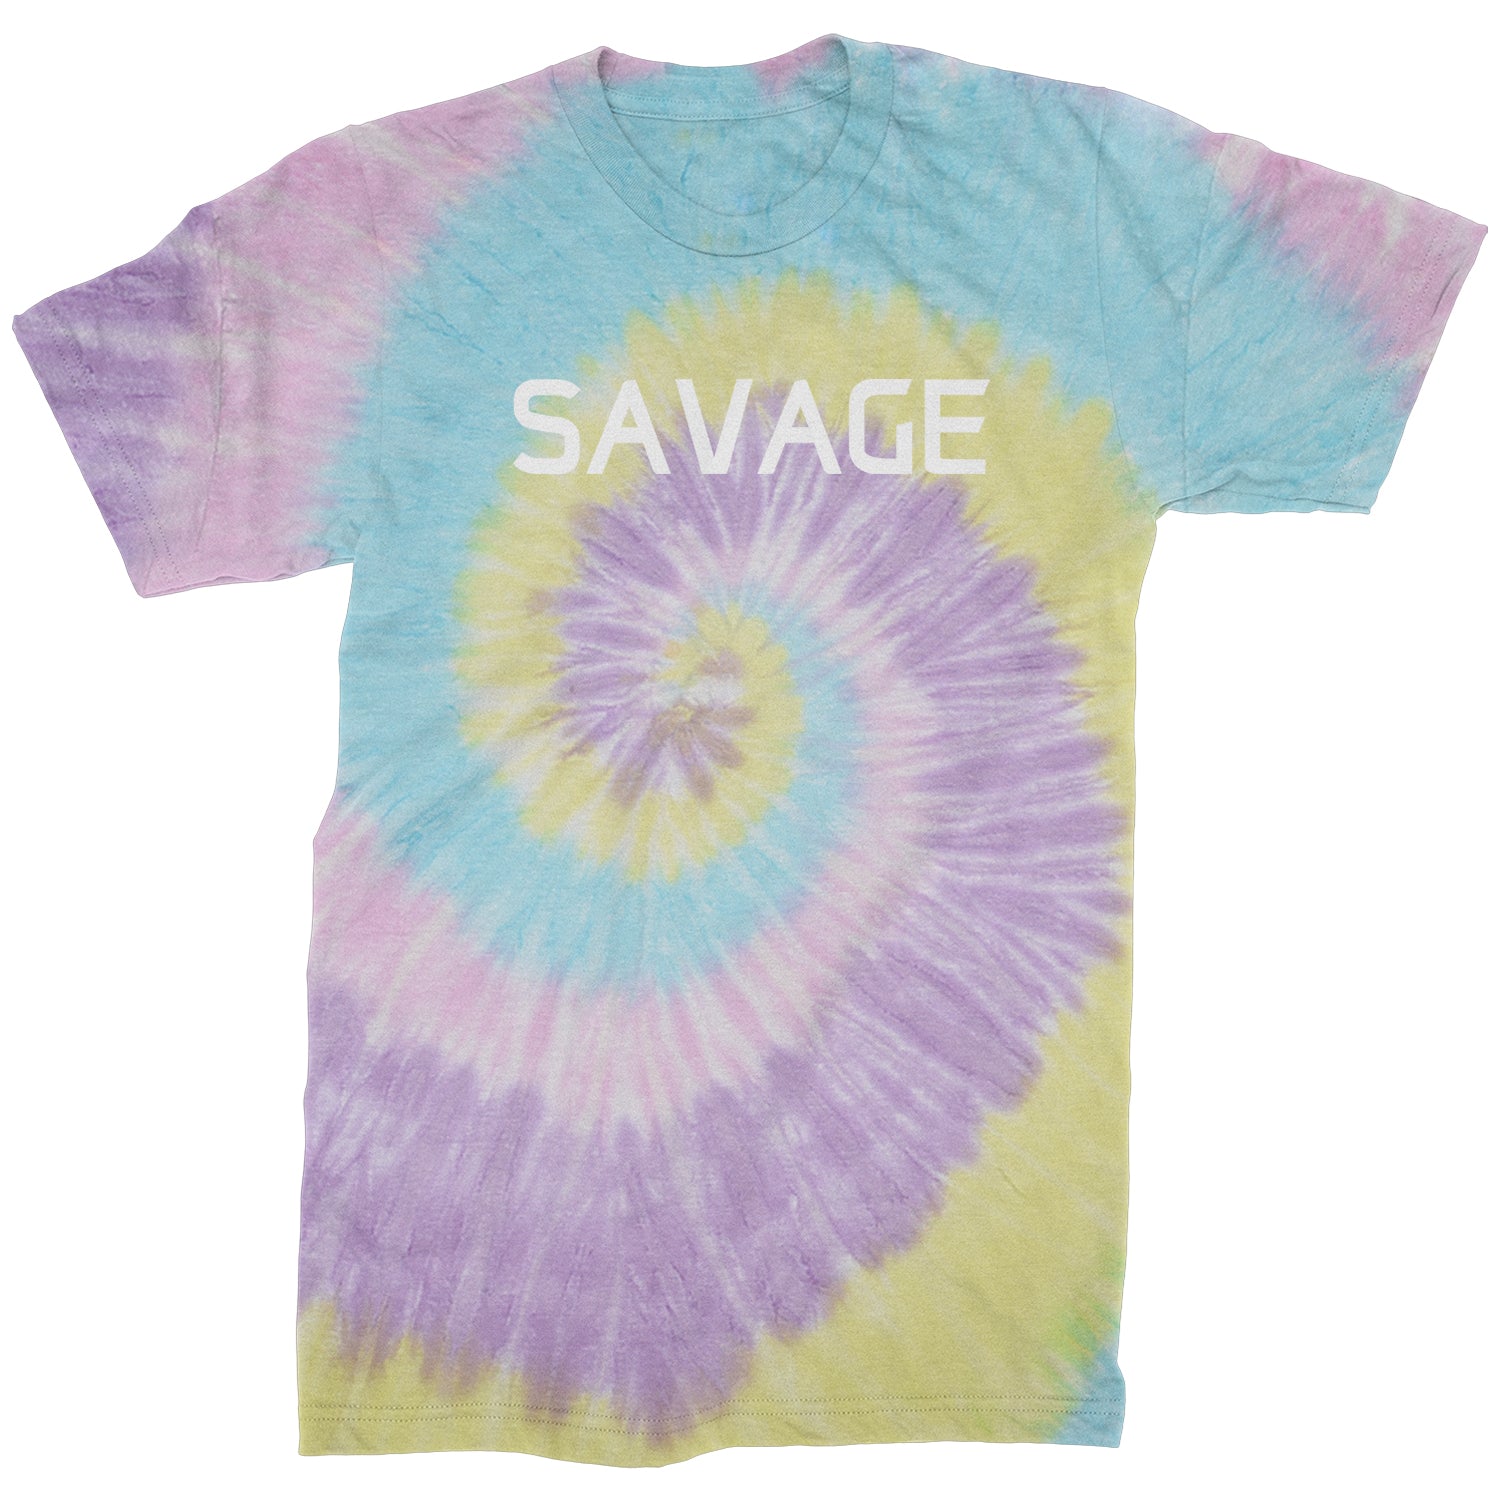 Savage Mens T-shirt #expressiontees by Expression Tees